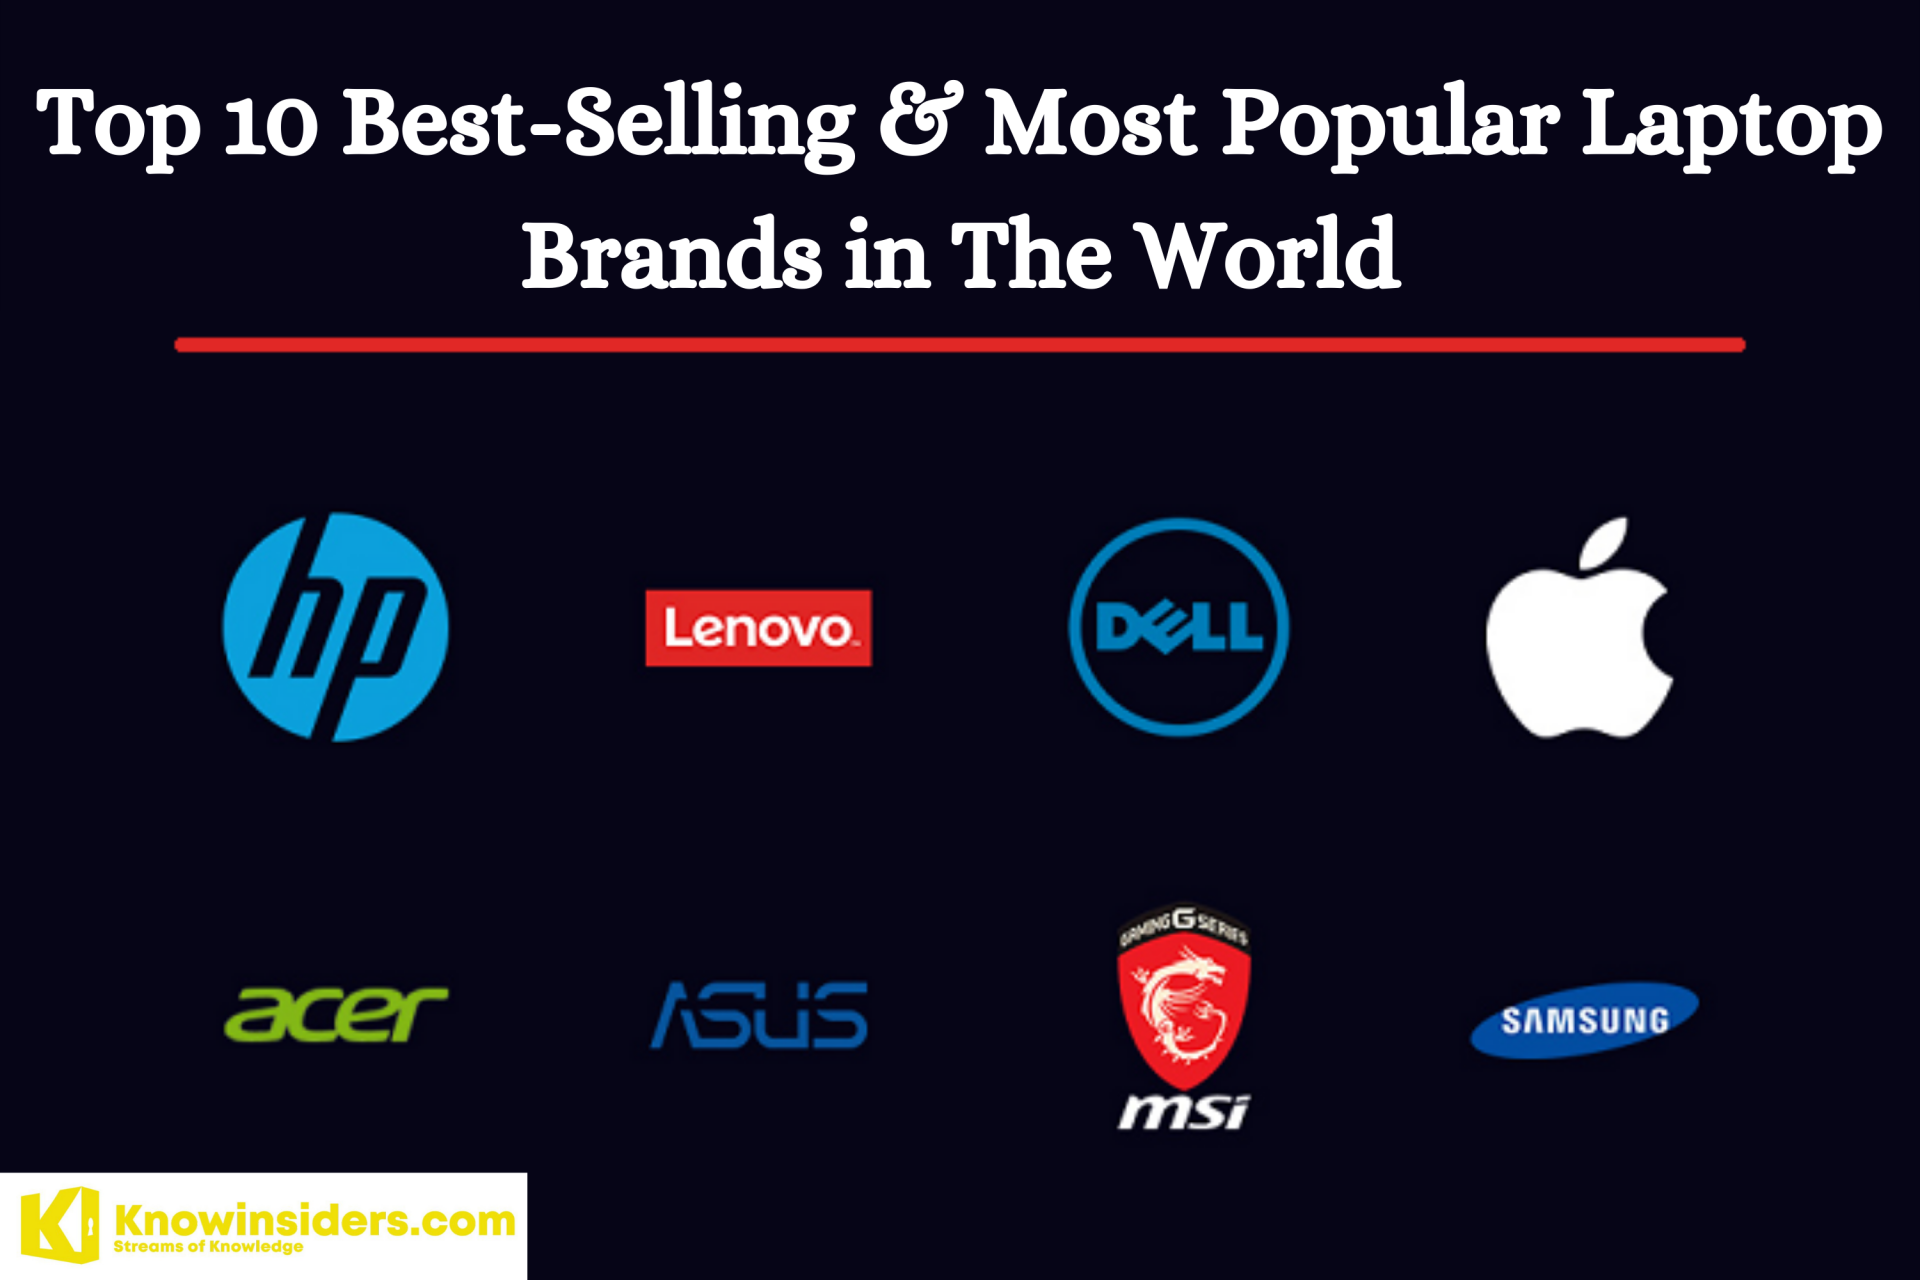 Top 10 Best-Selling & Most Popular Laptop Brands in The World